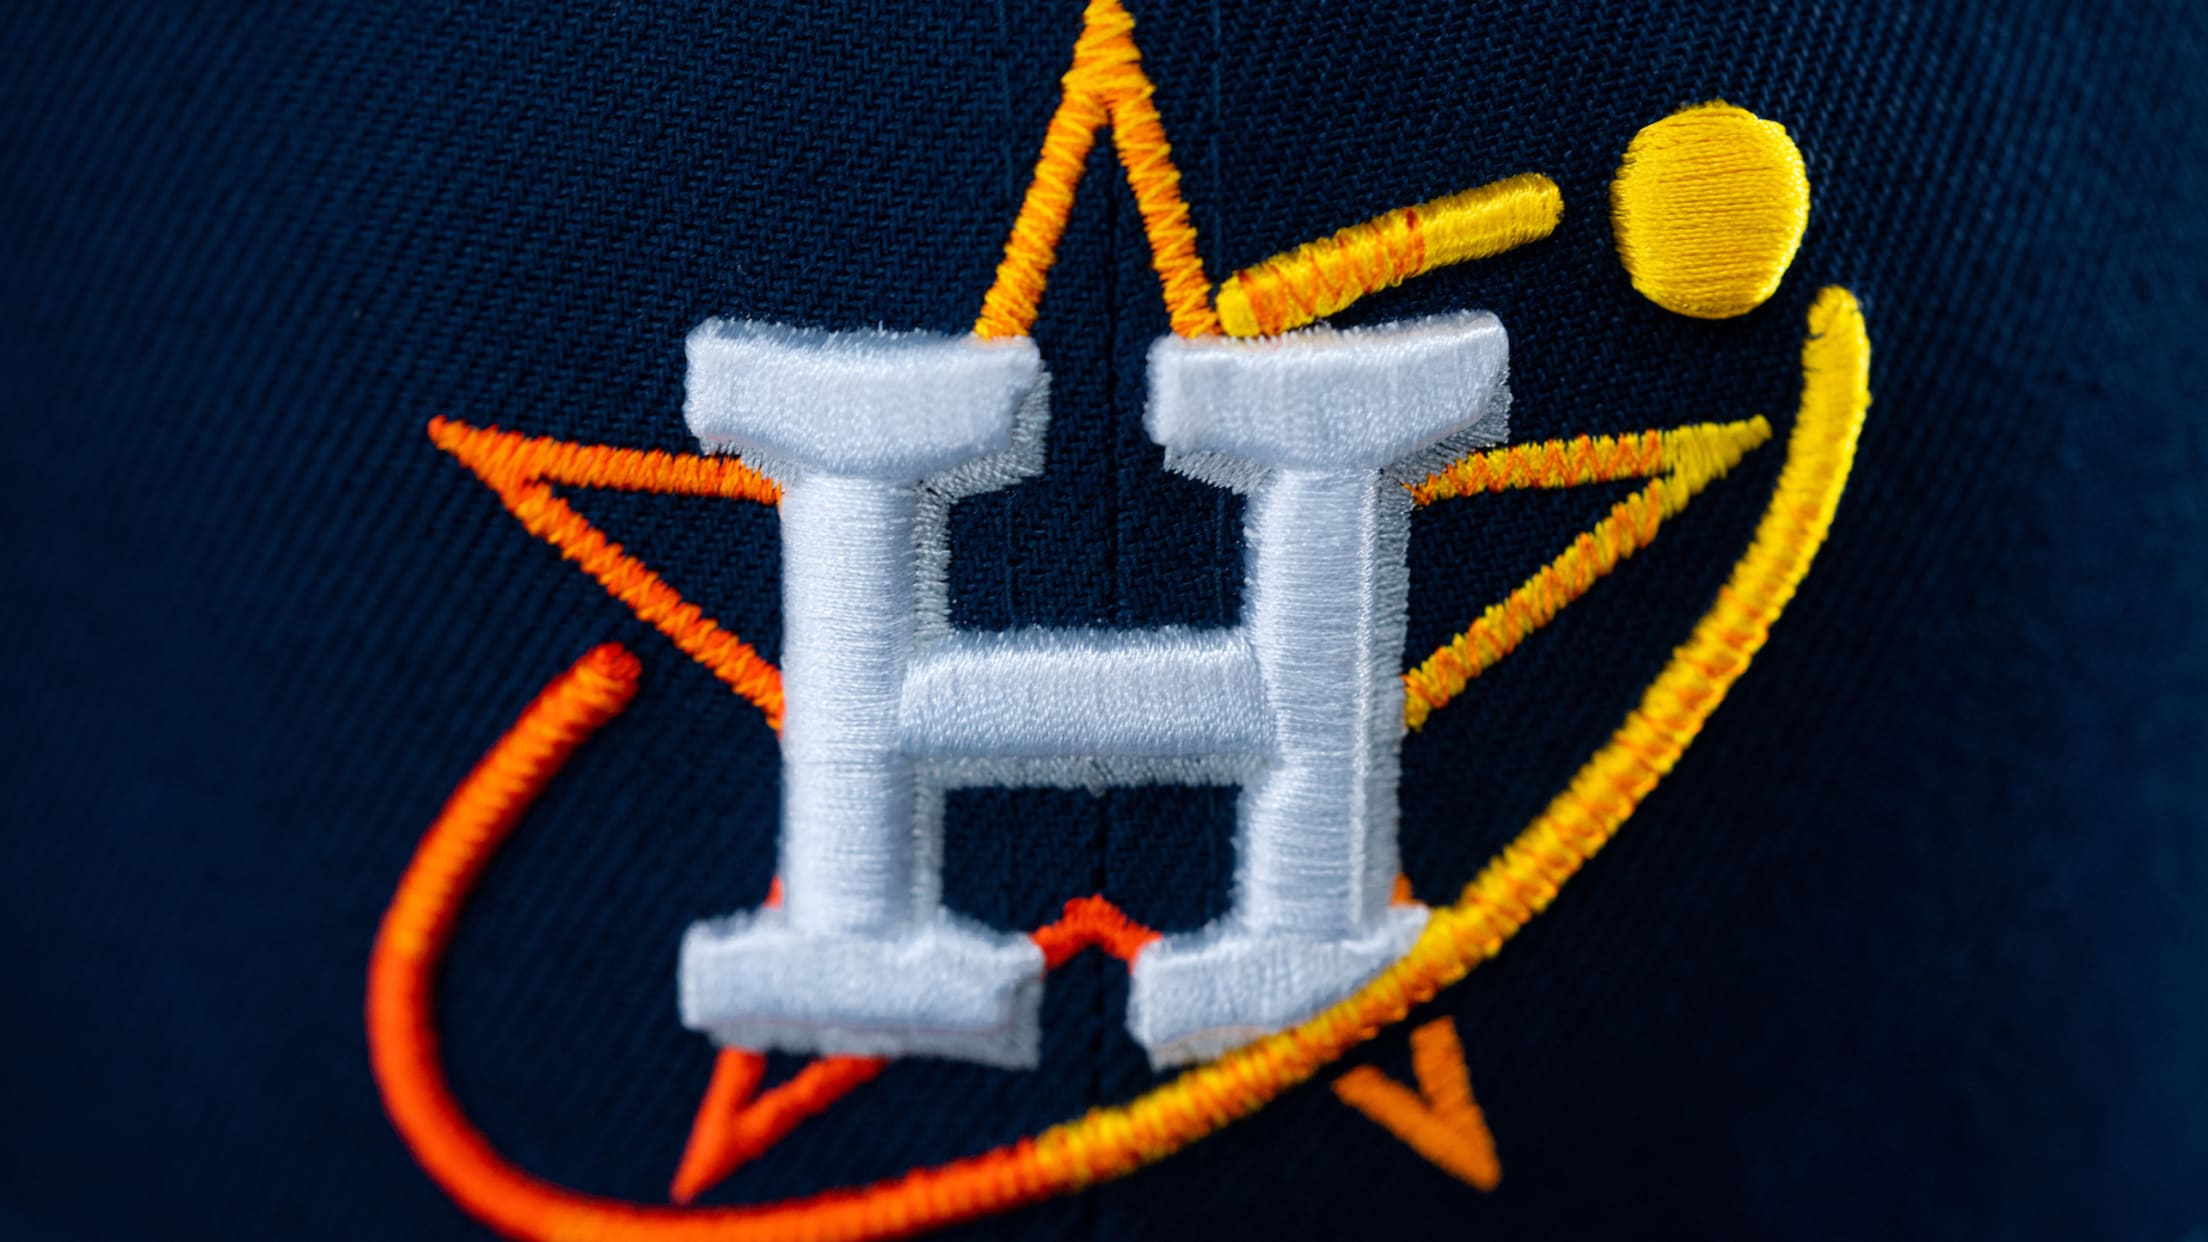 houston city connect jersey